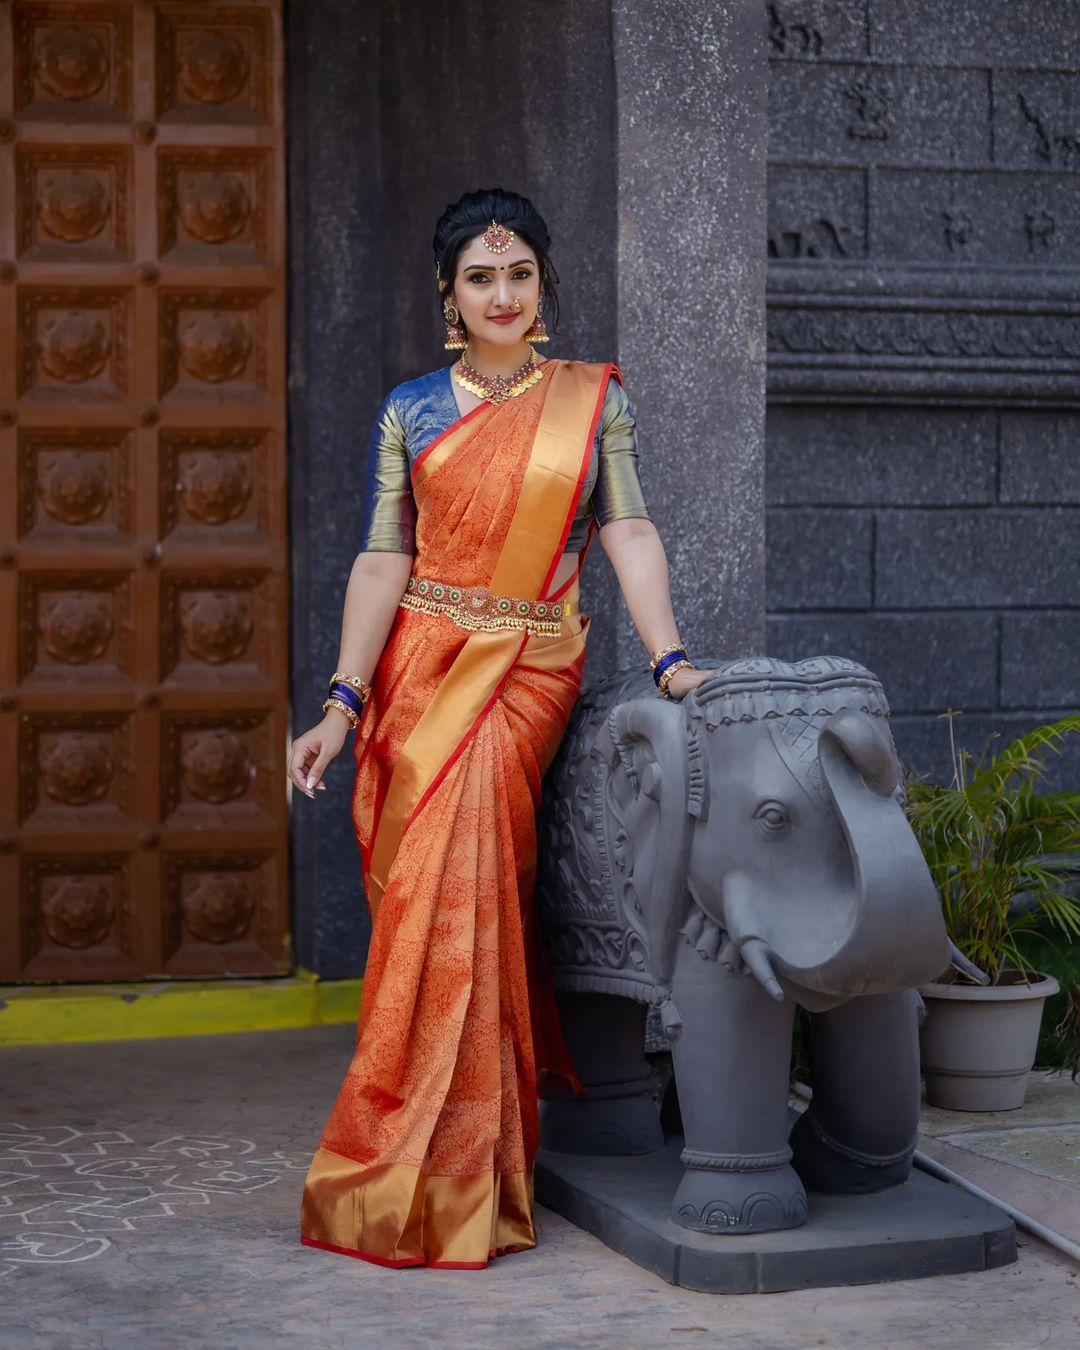 Actress sridevi looking beautiful in traditional ware-Actress Sridevi, Actresssridevi, Sridevi Photos,Spicy Hot Pics,Images,High Resolution WallPapers Download